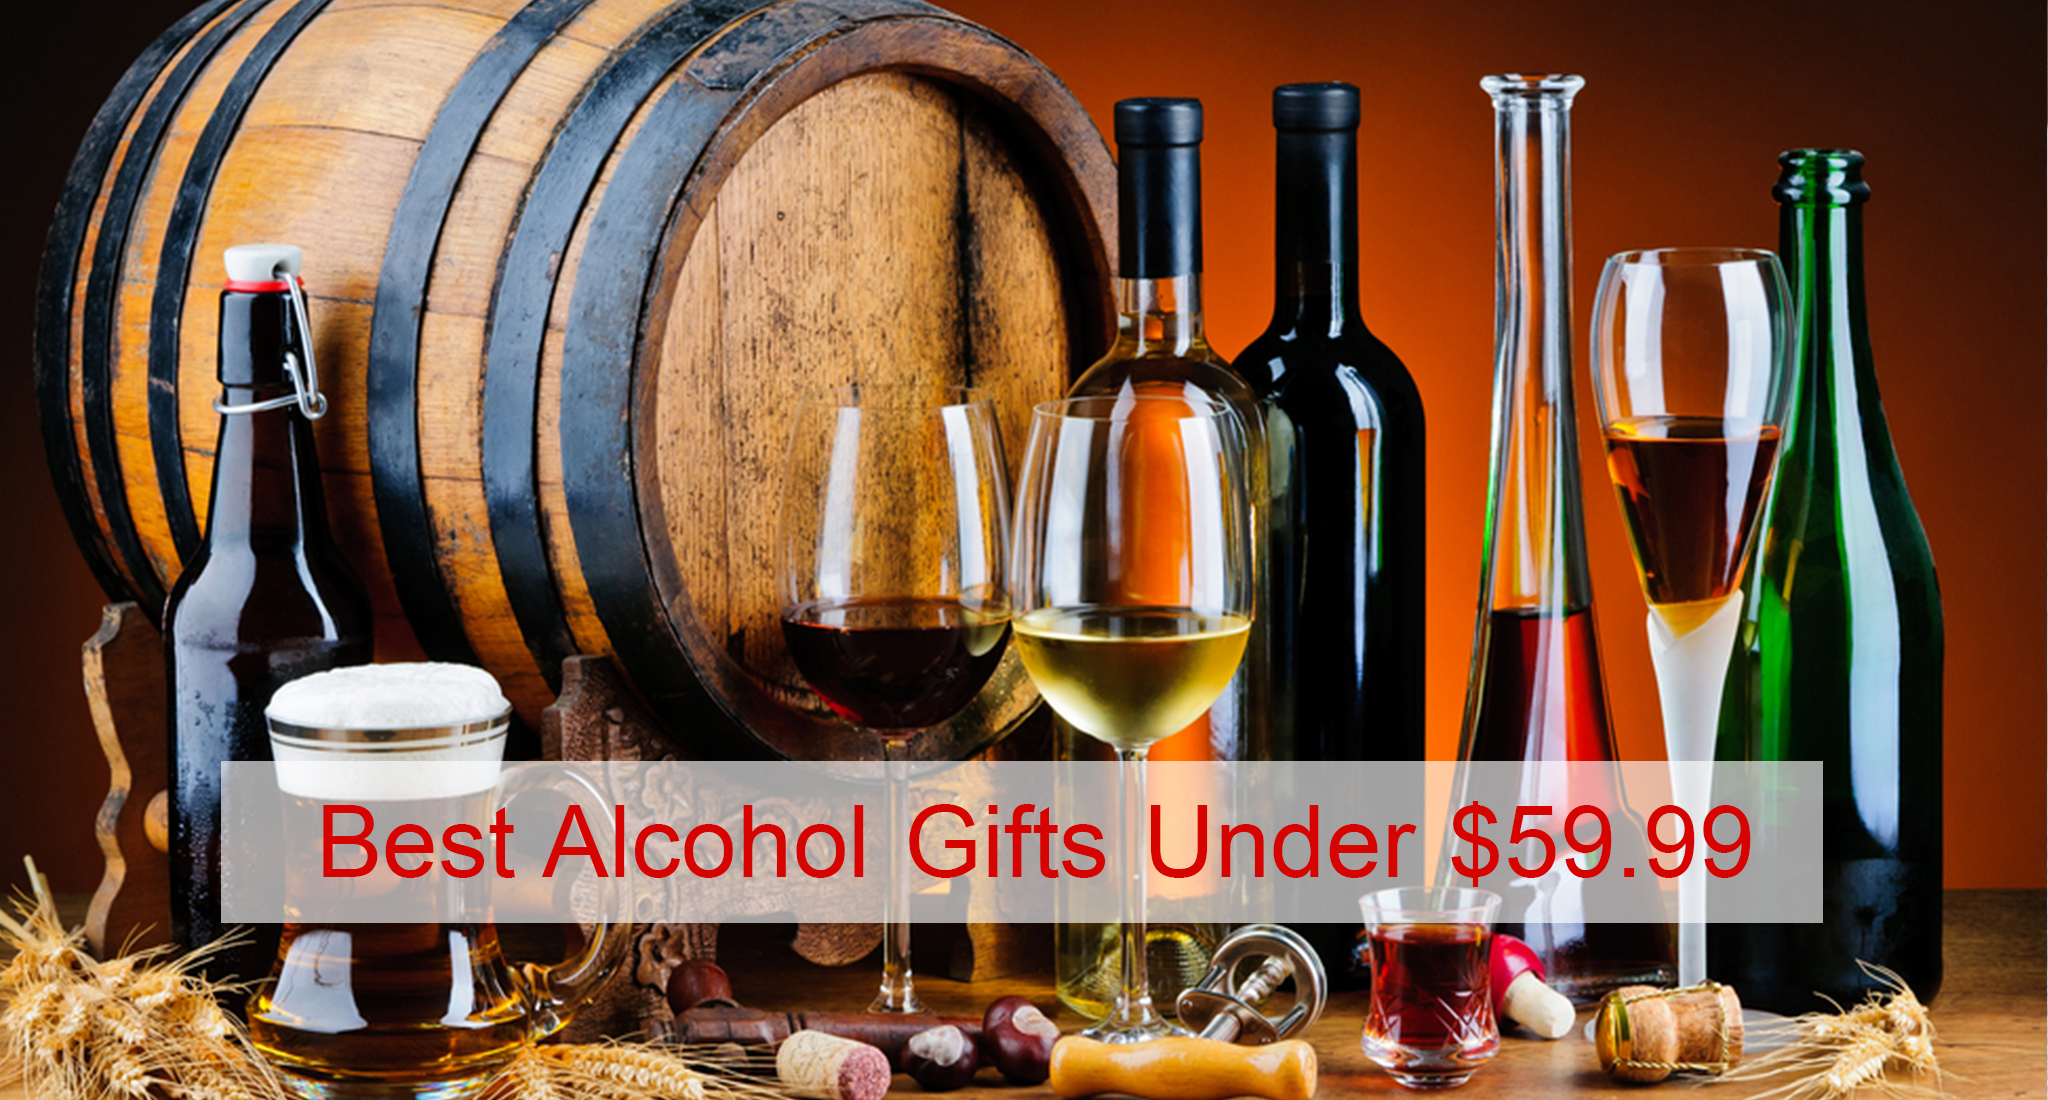 Best Alcohol Gifts Under $59.99